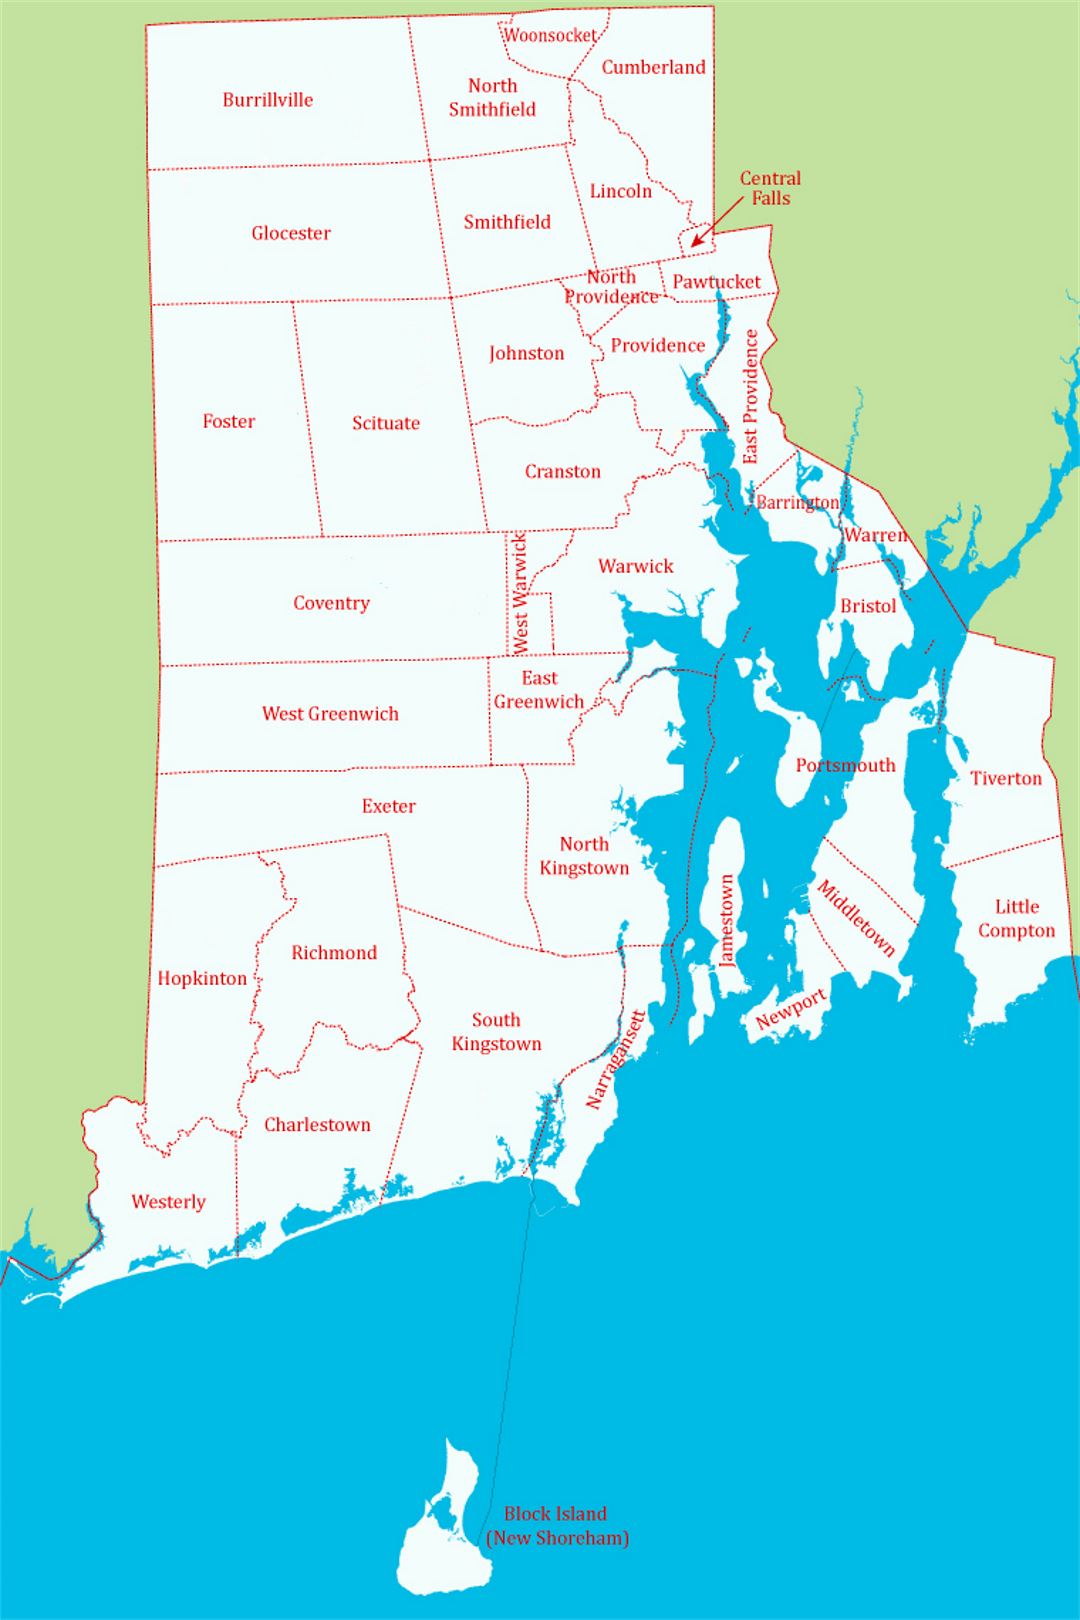 Detailed administrative map of Rhode Island state